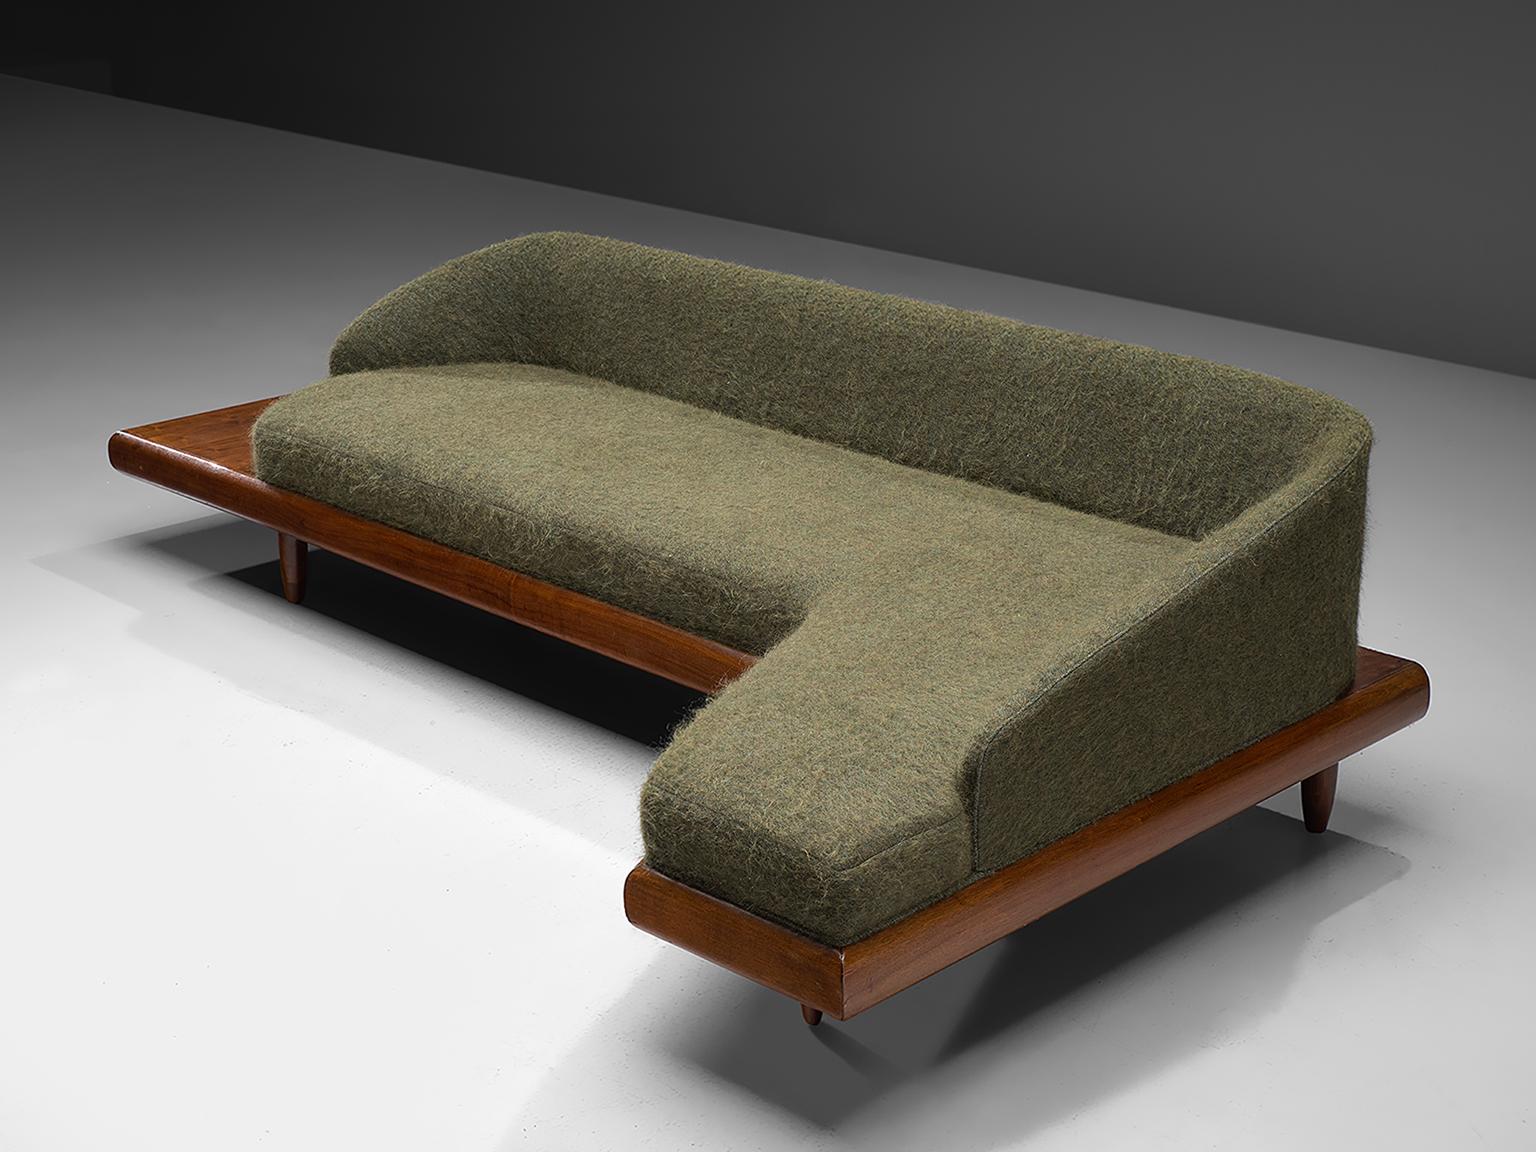 Adrian Pearsall, 'Boomerang' sofa, in green Pierre Frey fabric and walnut, United States, 1960s

This boomerang sofa has a unique shape with sinuous lines which create a monumental and inviting look. The backrest holds sloping armrests and a high,